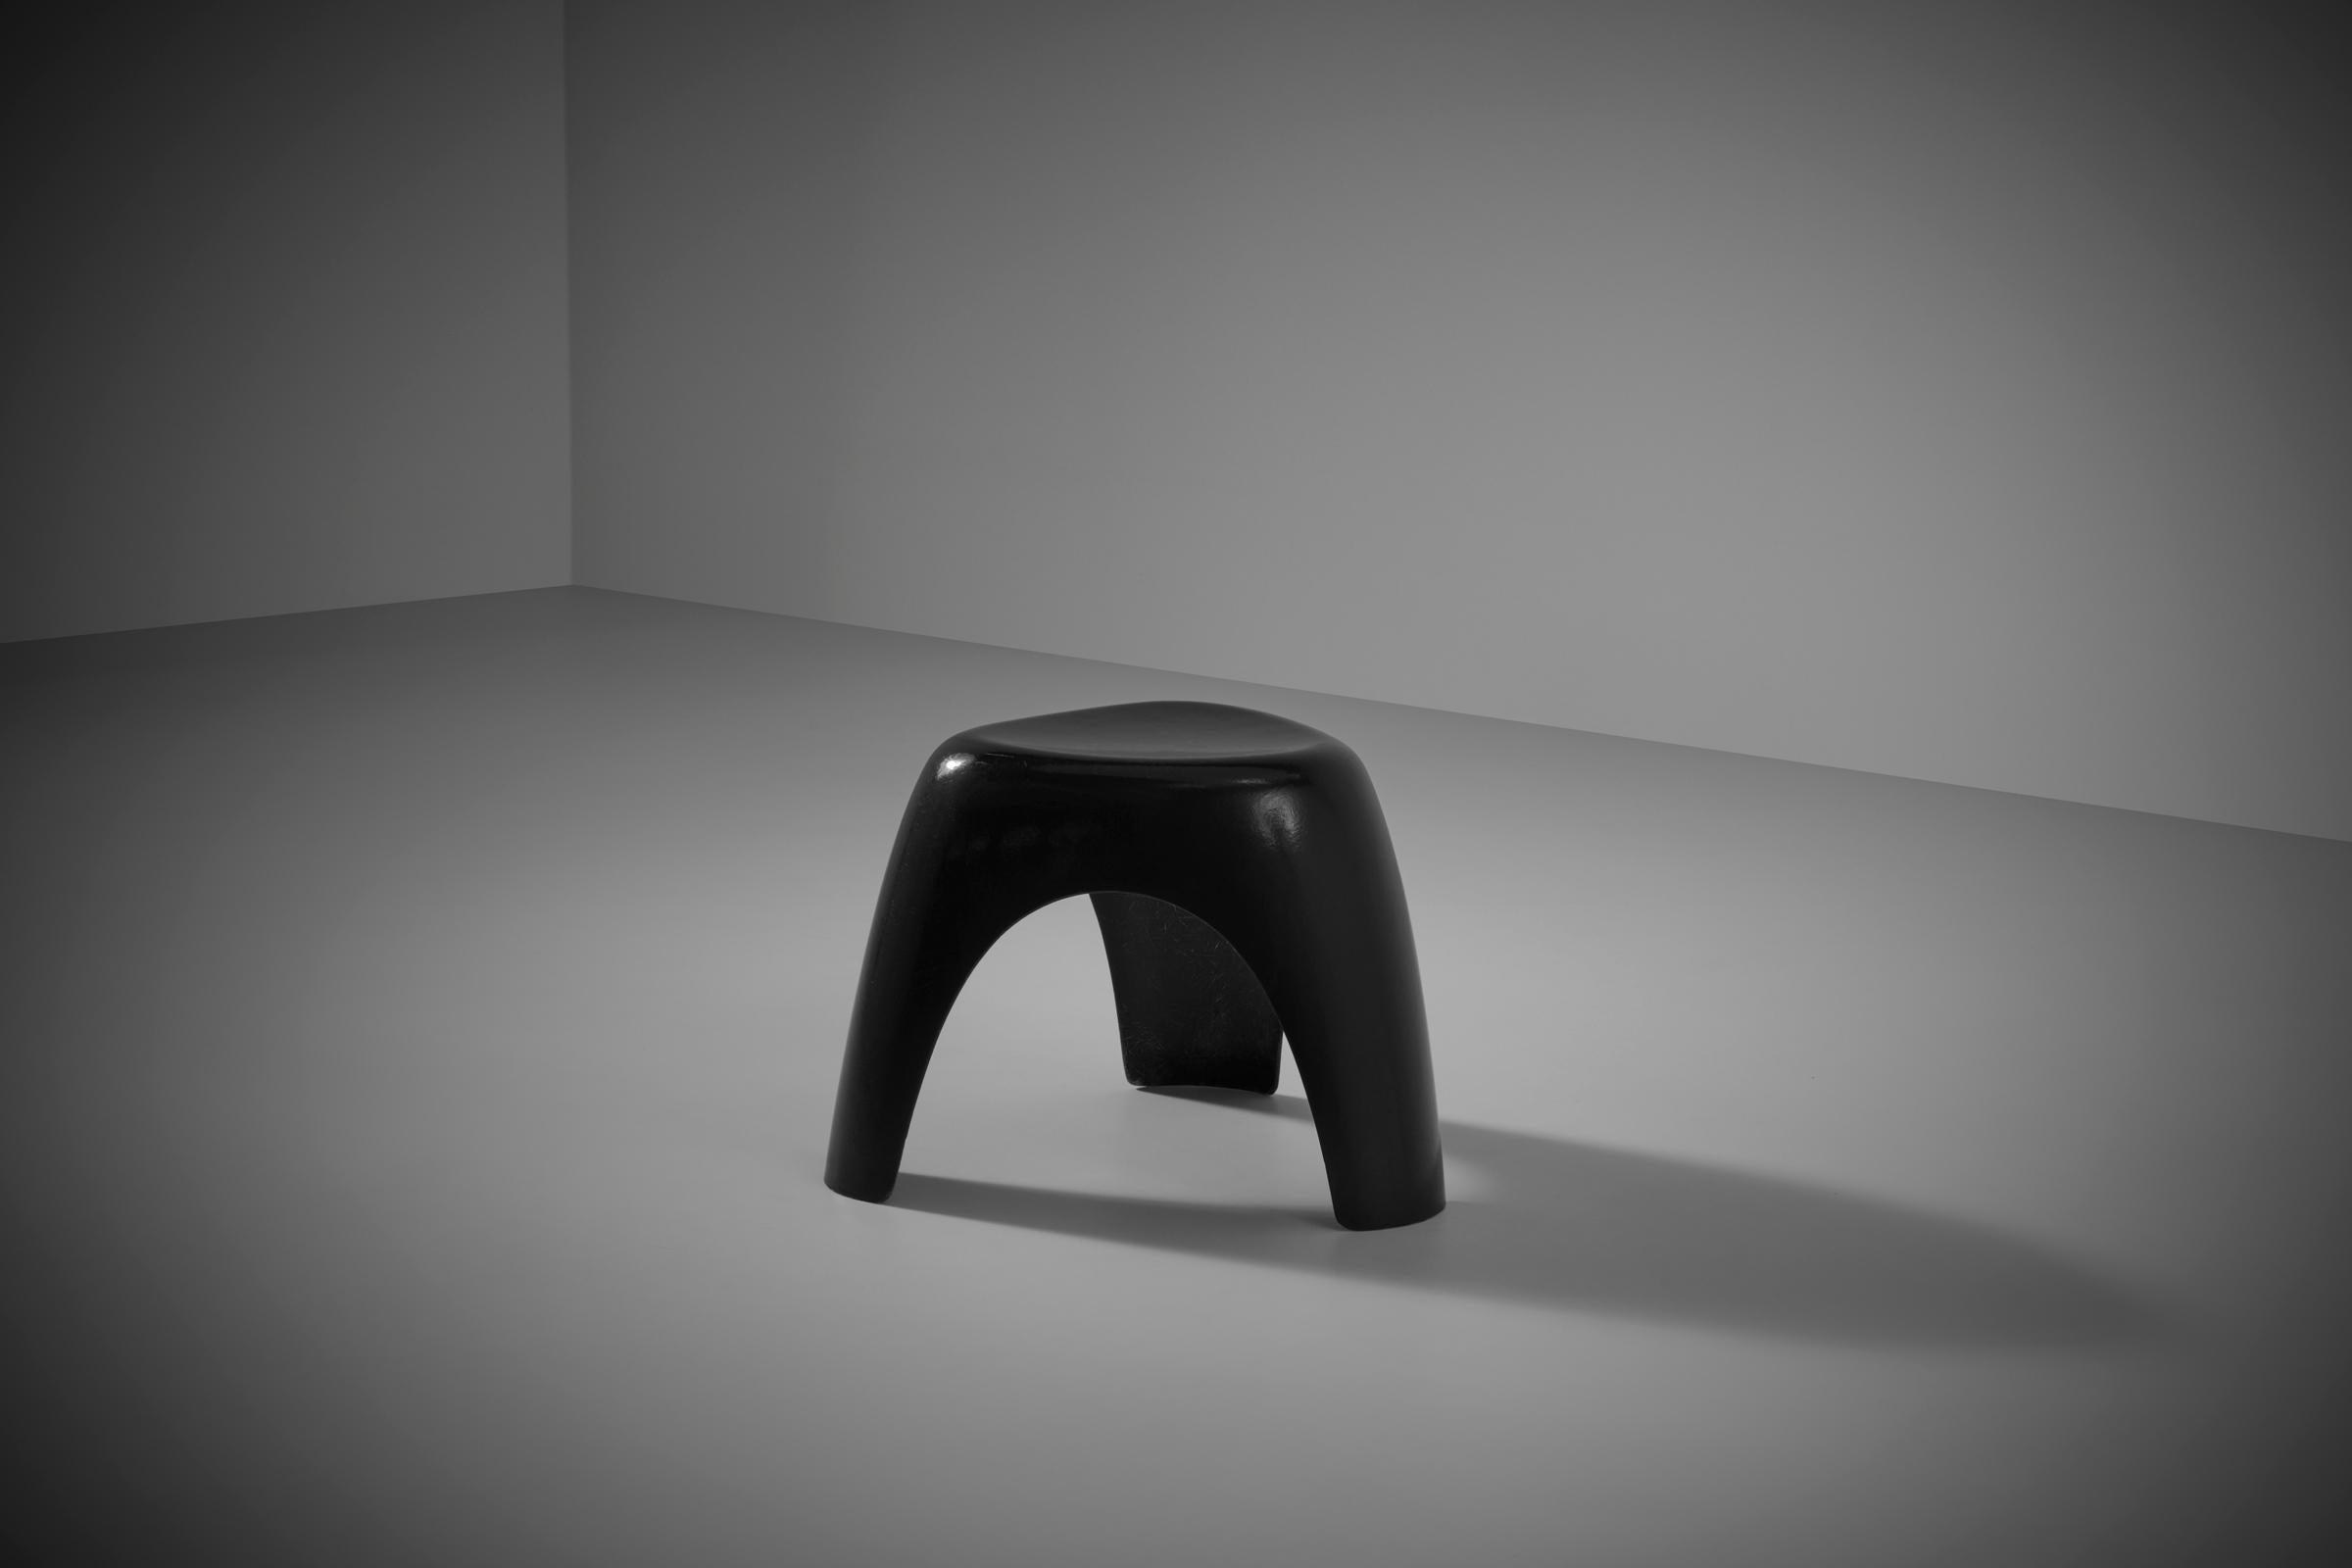 Elephant stool by Sori Yanagi for Kotobuki Seating Company, Tokyo 1954. Yanagi originally designed the stool as a work chair for his studio, a couple of years later it was released by Kotobuki after the technology for producing fiberglass was